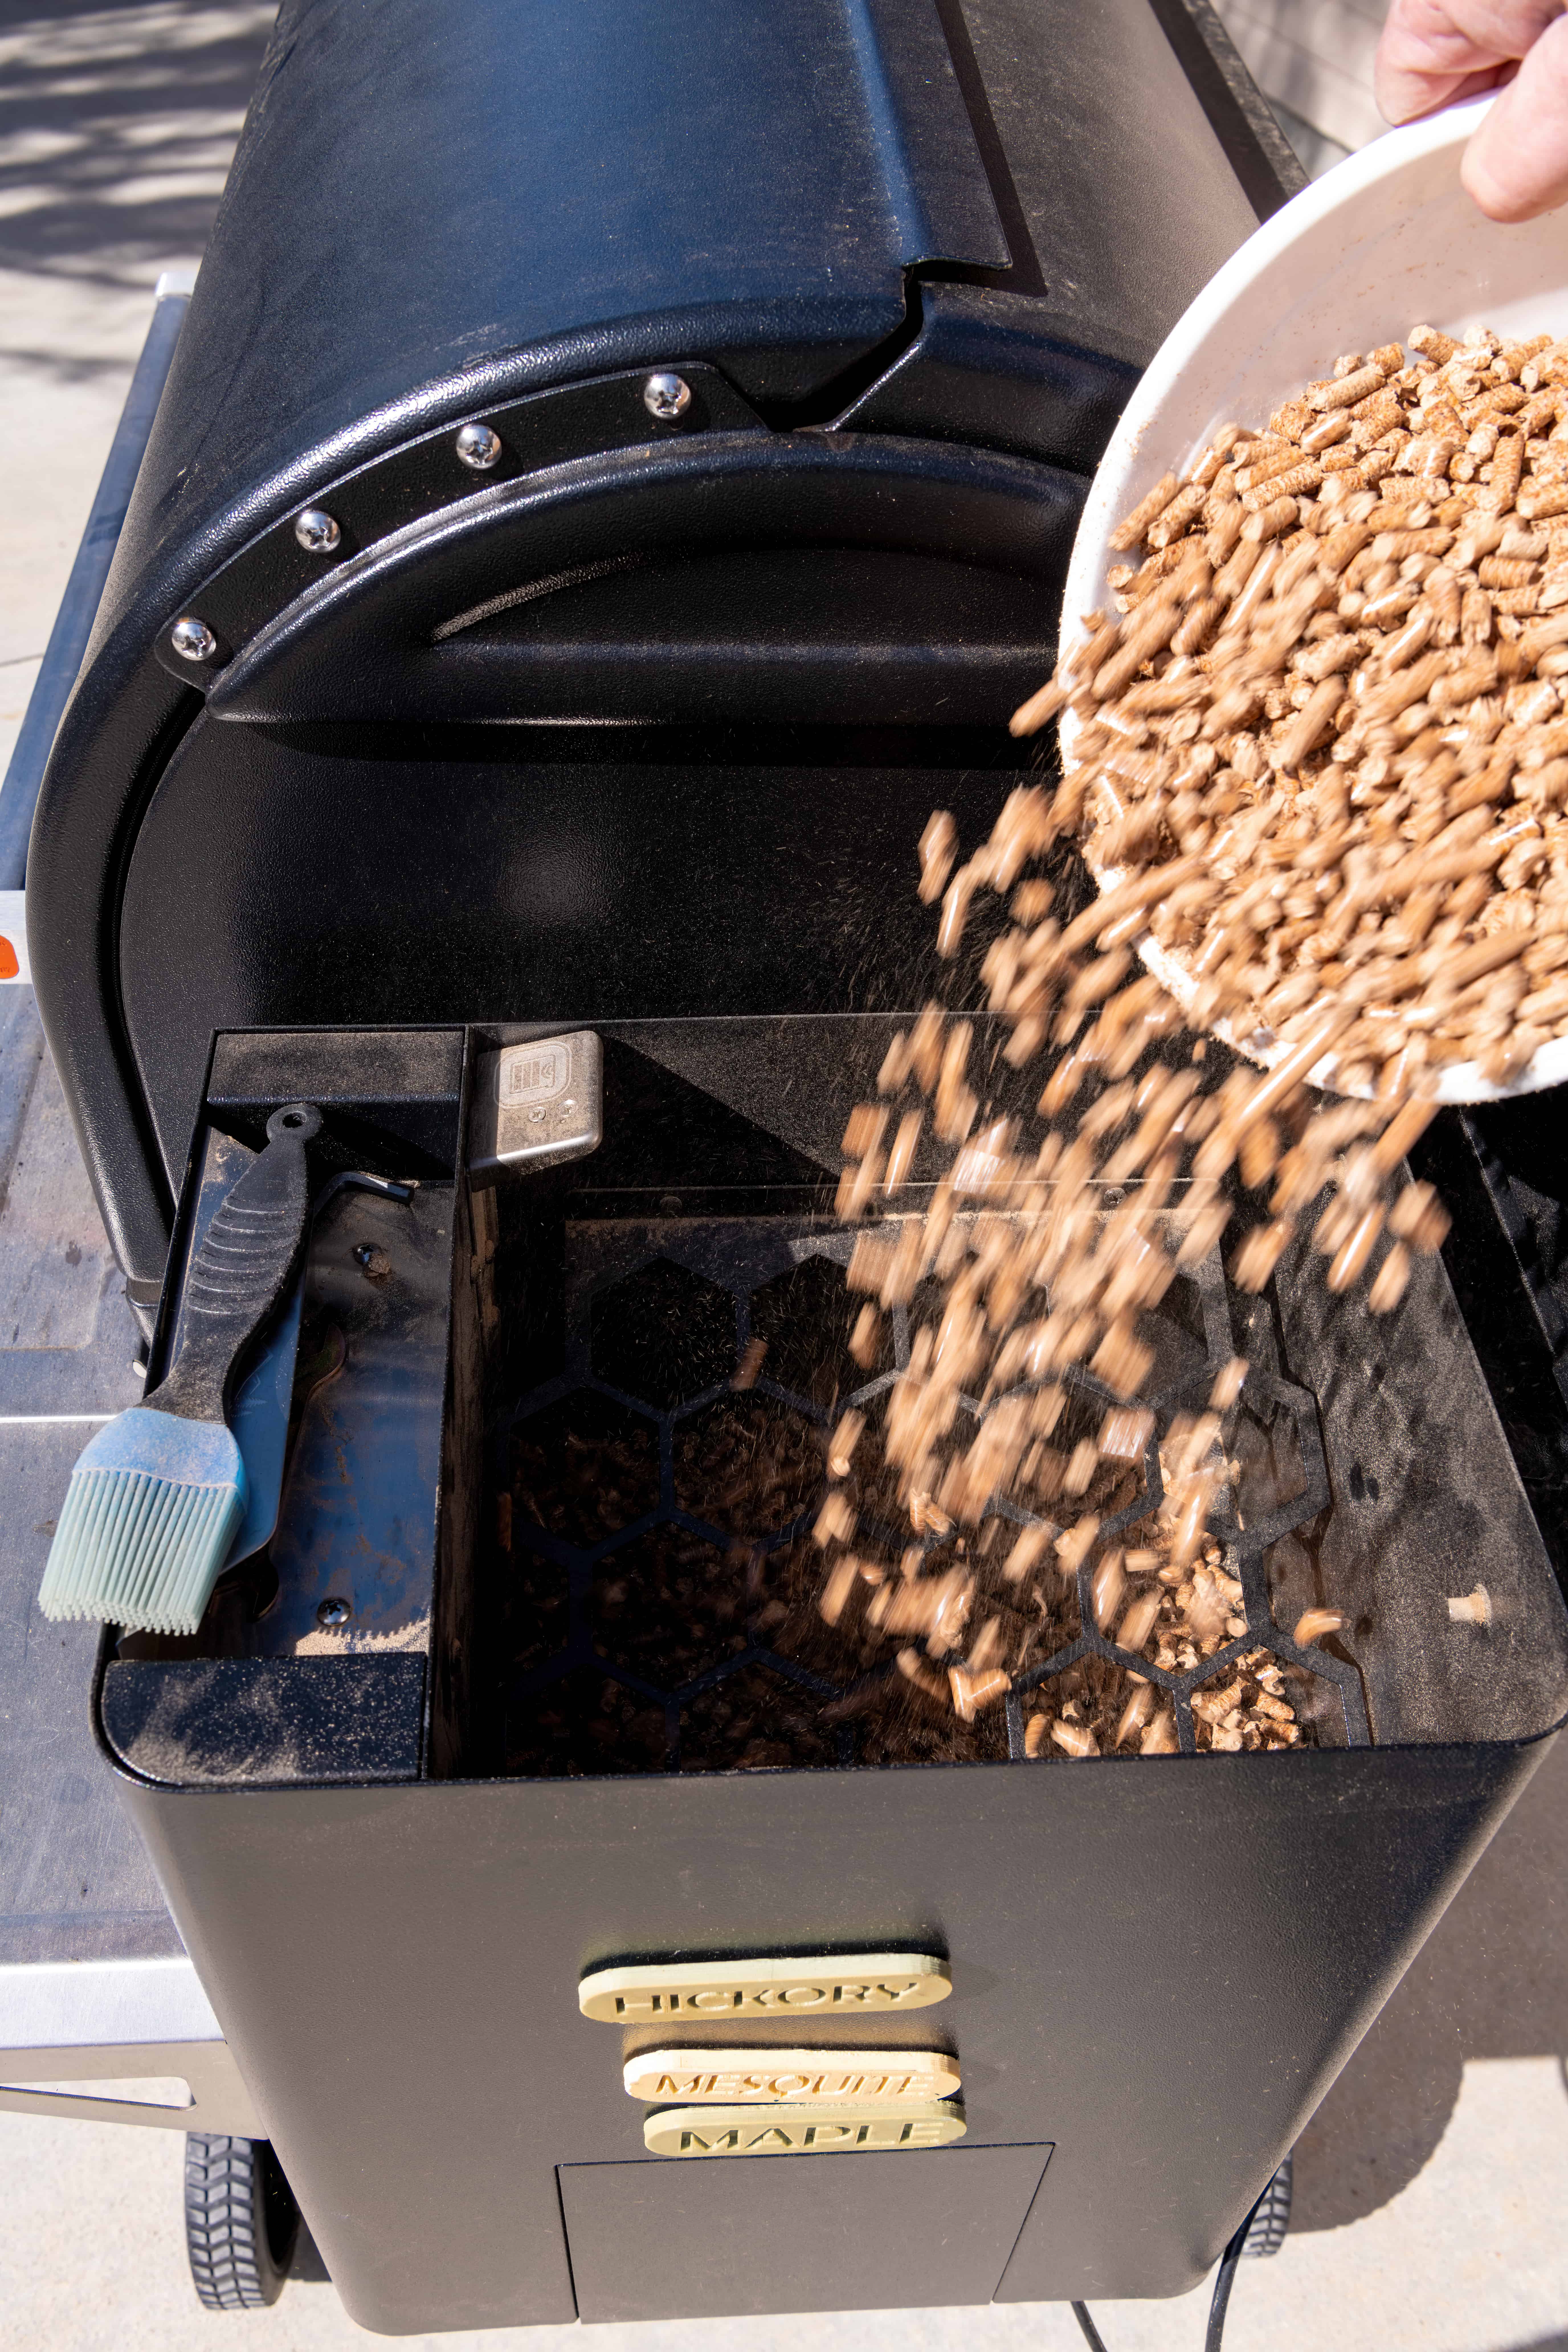 Why Choose A Pellet Grill? (Answered)